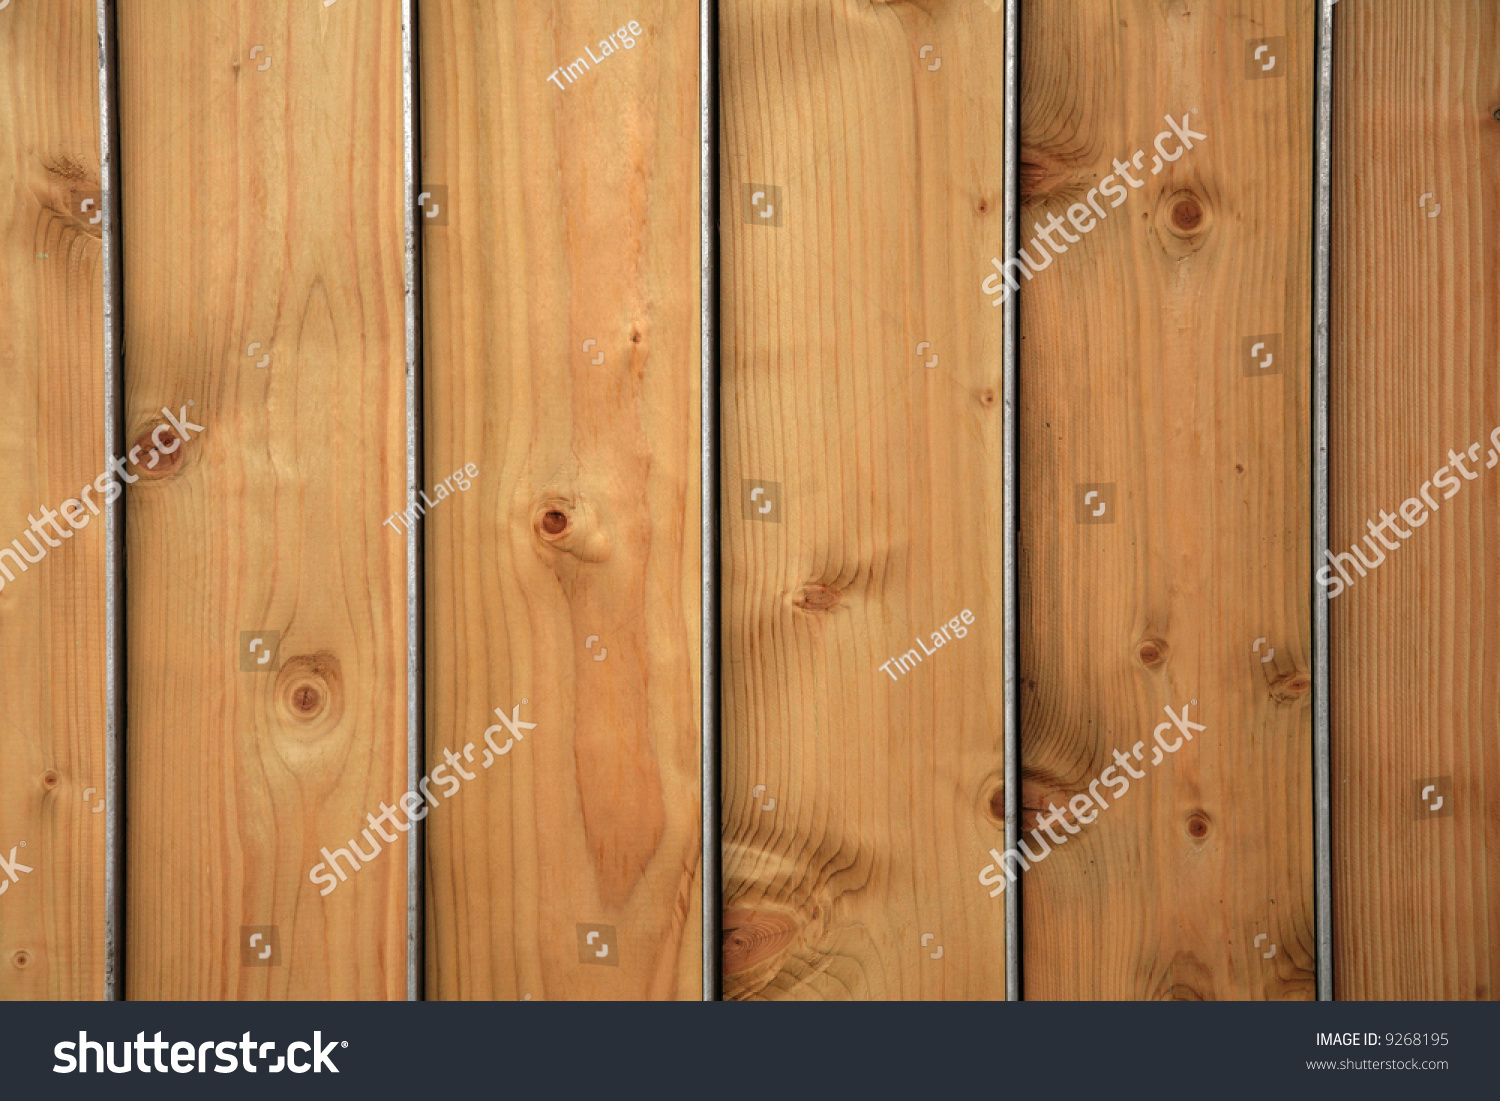 Wooden panels with steel inserts - for use as a background #9268195